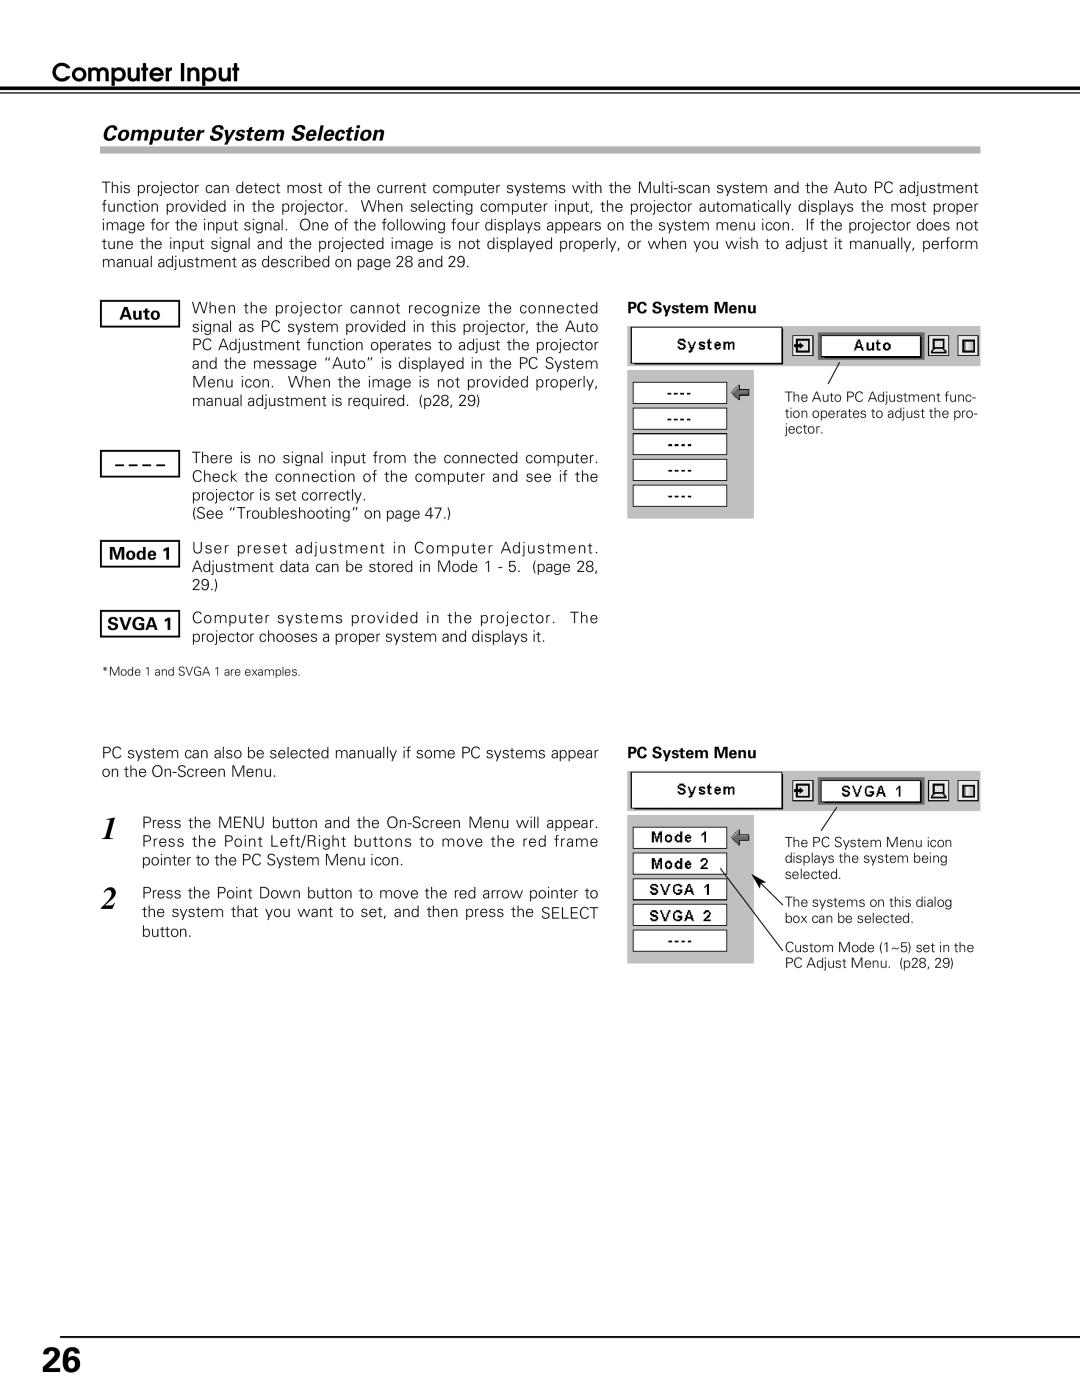 Black Box LC-XE10 instruction manual Computer Input, Computer System Selection, PC System Menu 